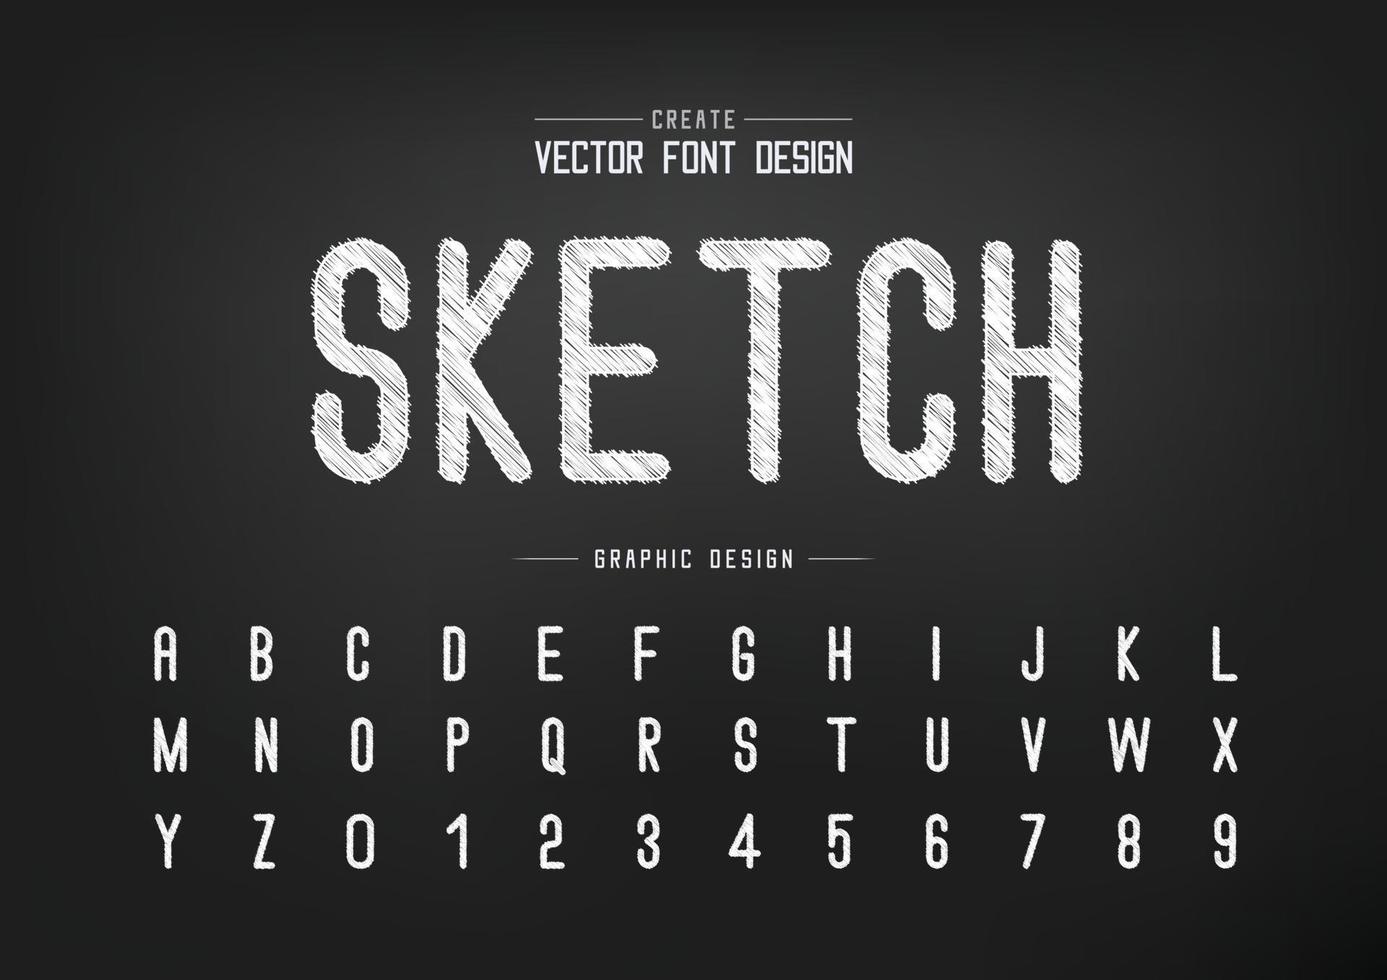 Sketch Font and alphabet vector, Chalk Letter style typeface and number design, Graphic text on background vector